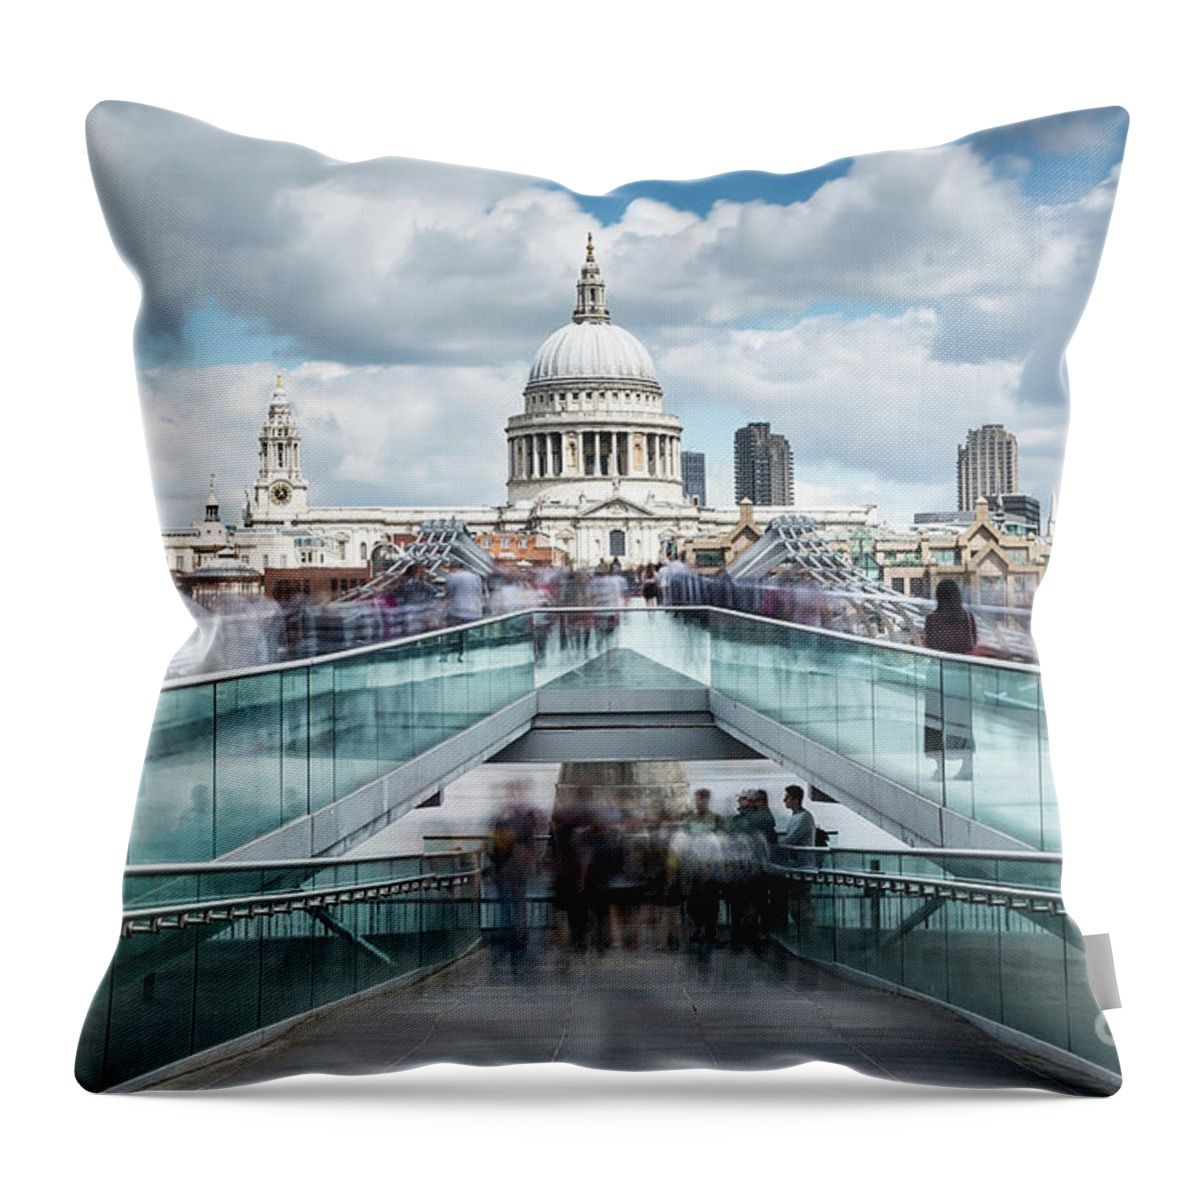 Architecture Throw Pillow featuring the photograph Millennium Bridge by Svetlana Sewell